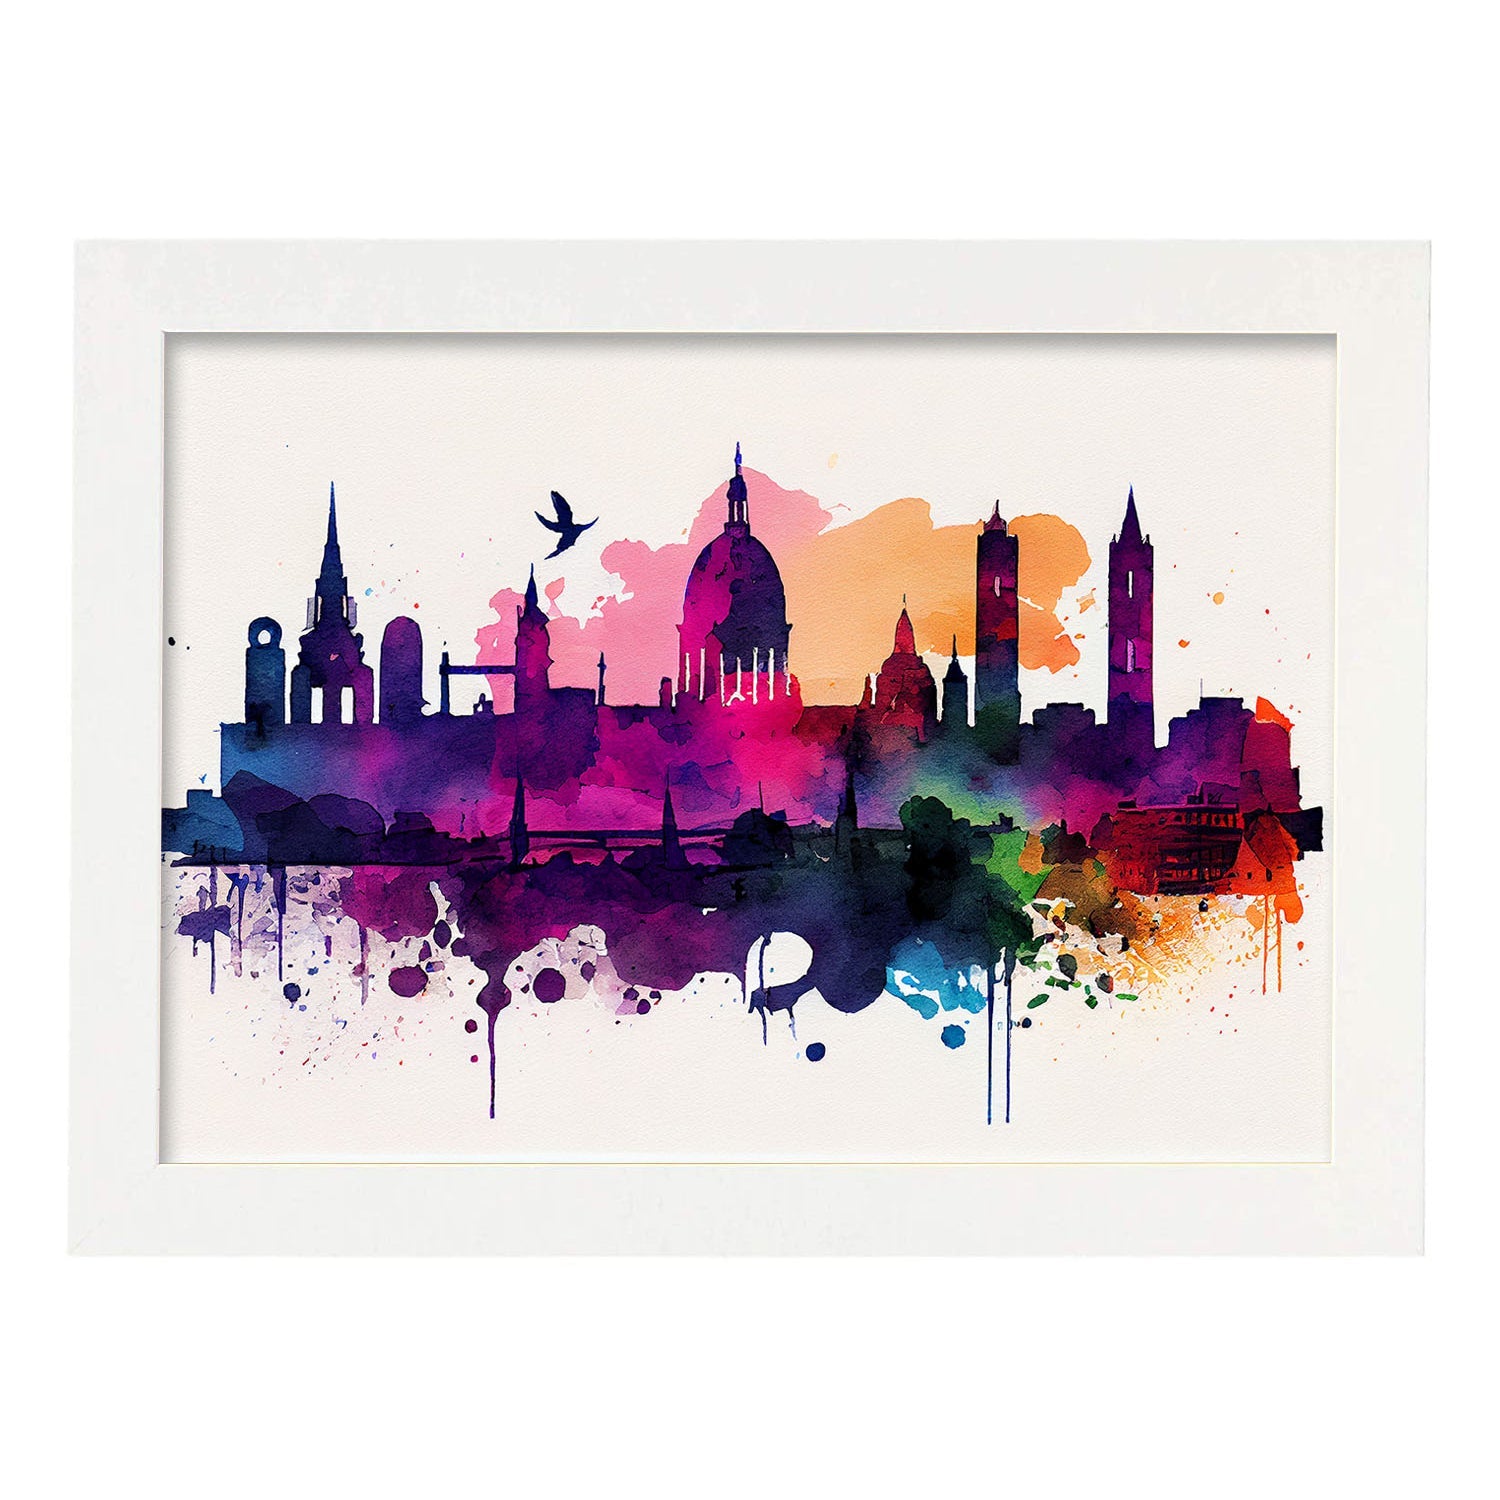 Nacnic watercolor of a skyline of the city of Dublin. Aesthetic Wall Art Prints for Bedroom or Living Room Design.-Artwork-Nacnic-A4-Marco Blanco-Nacnic Estudio SL